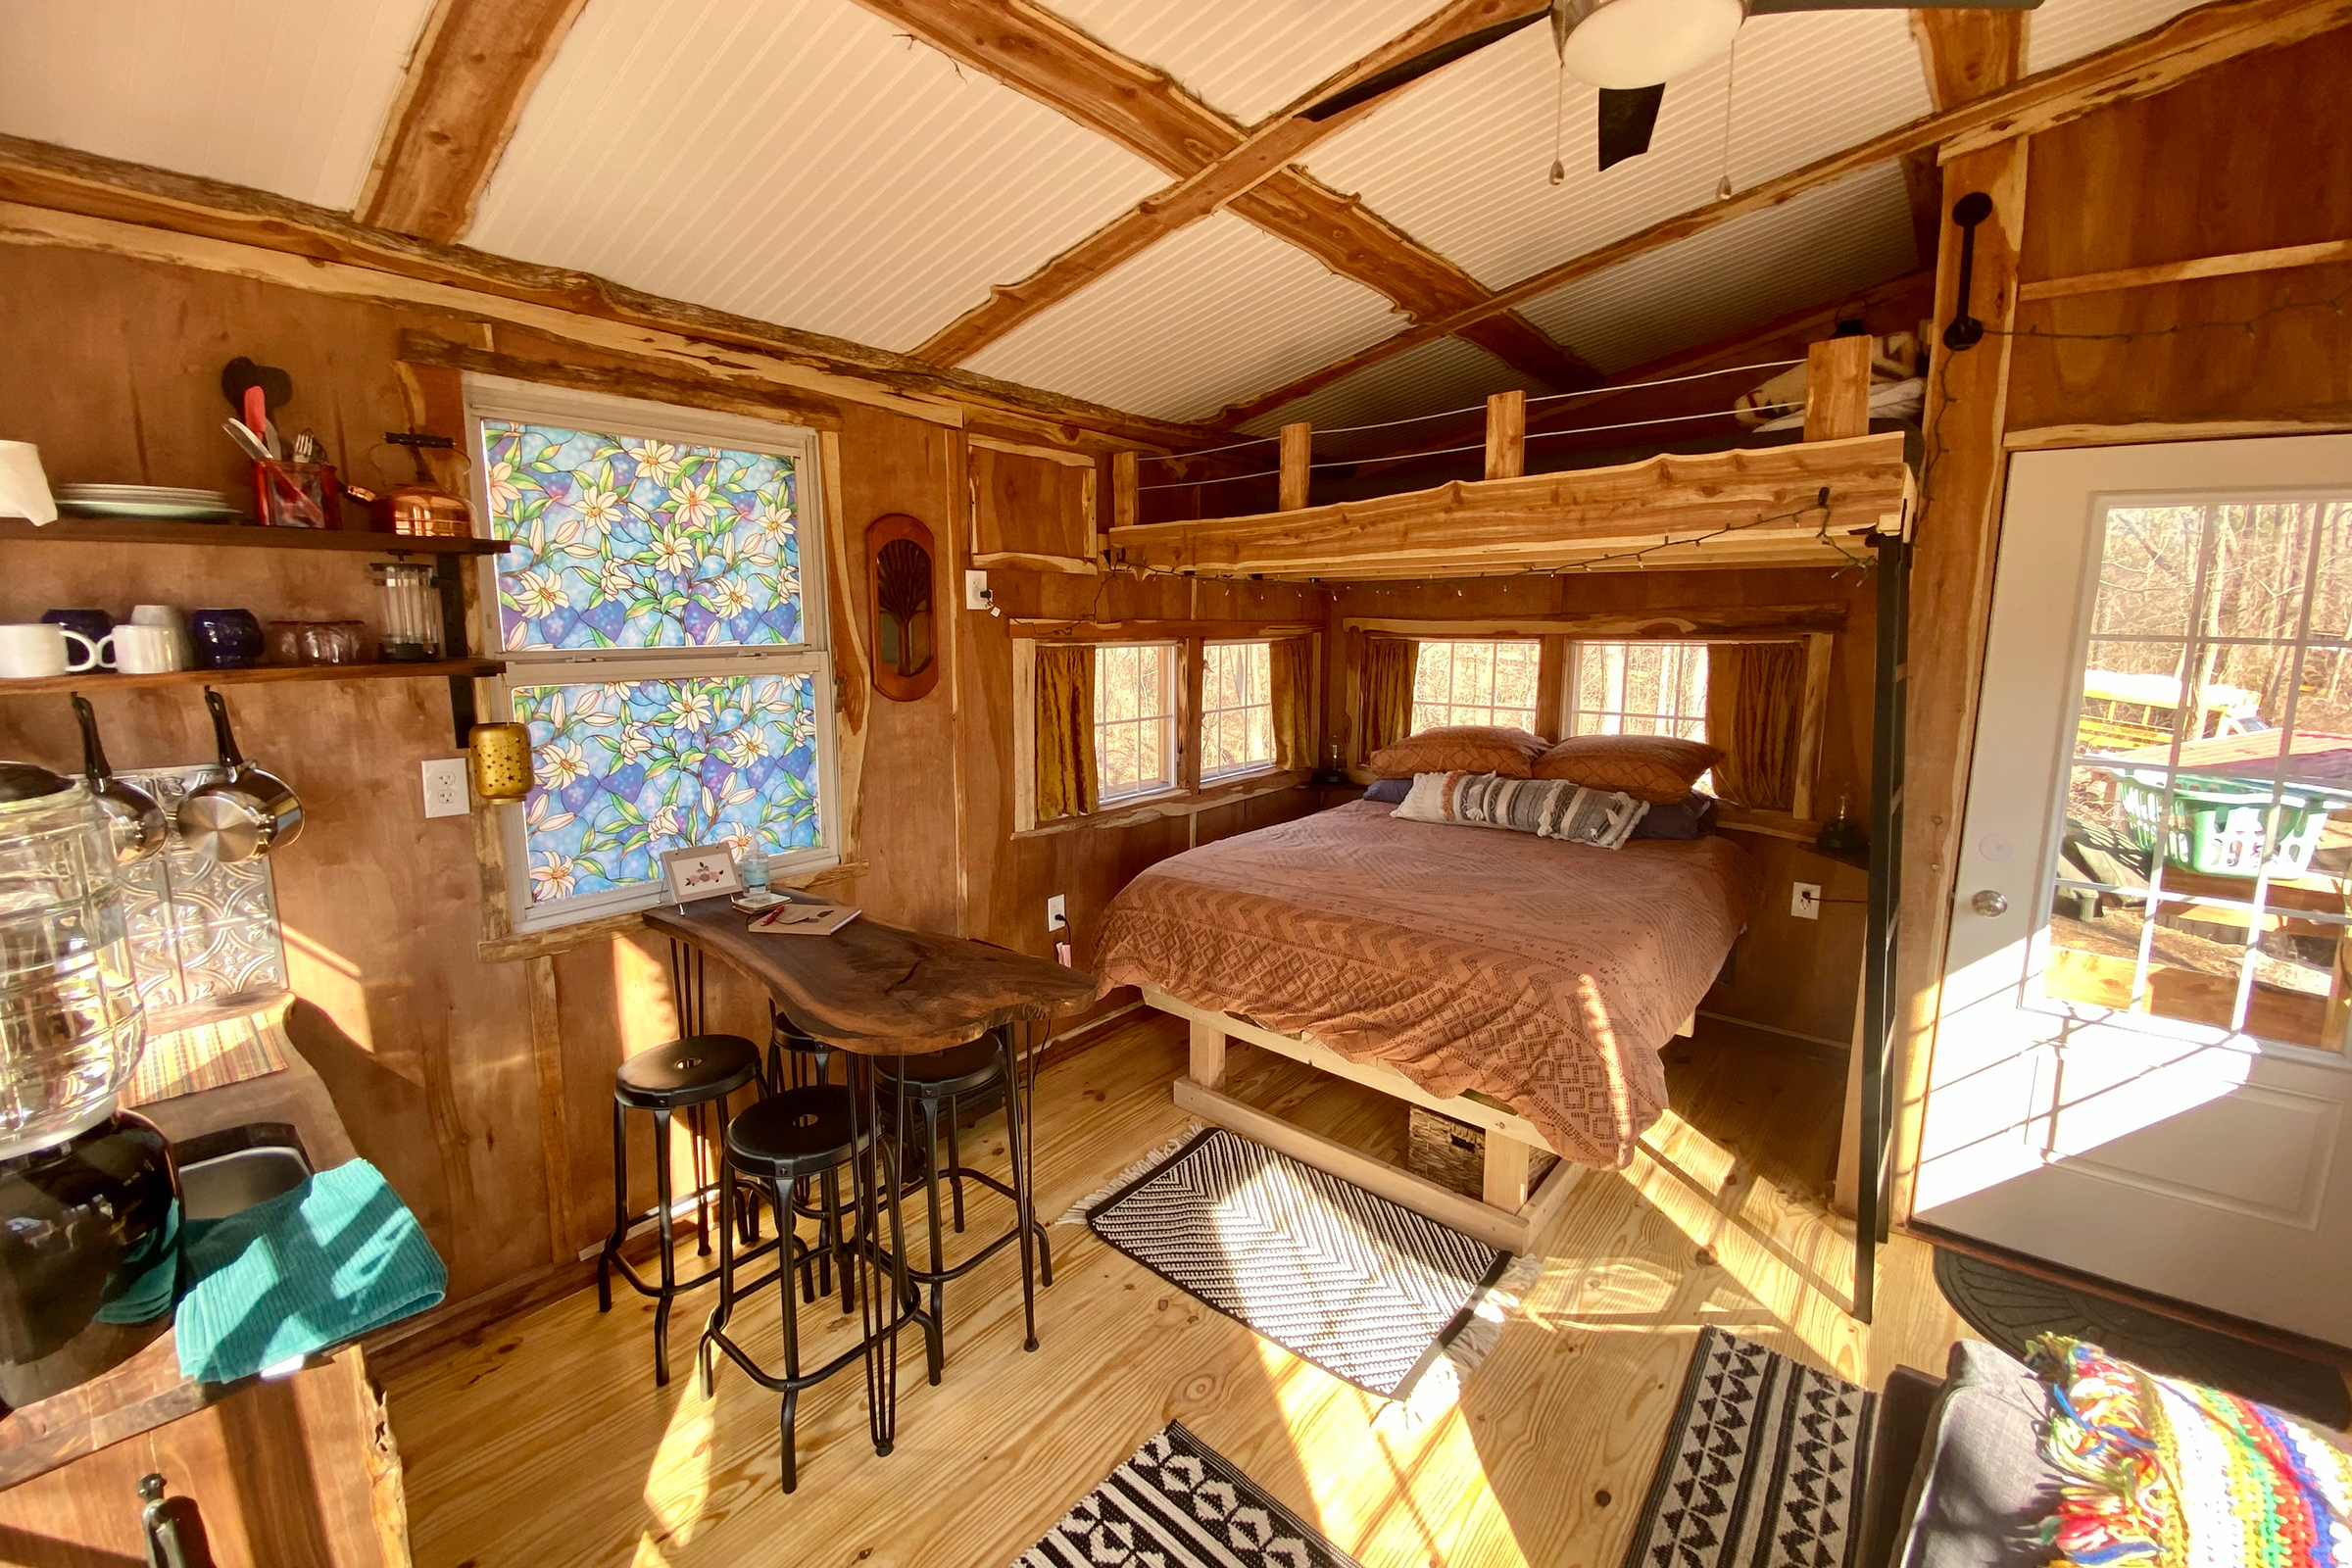 The bedroom in Sutherland's treehouse vacation rental.